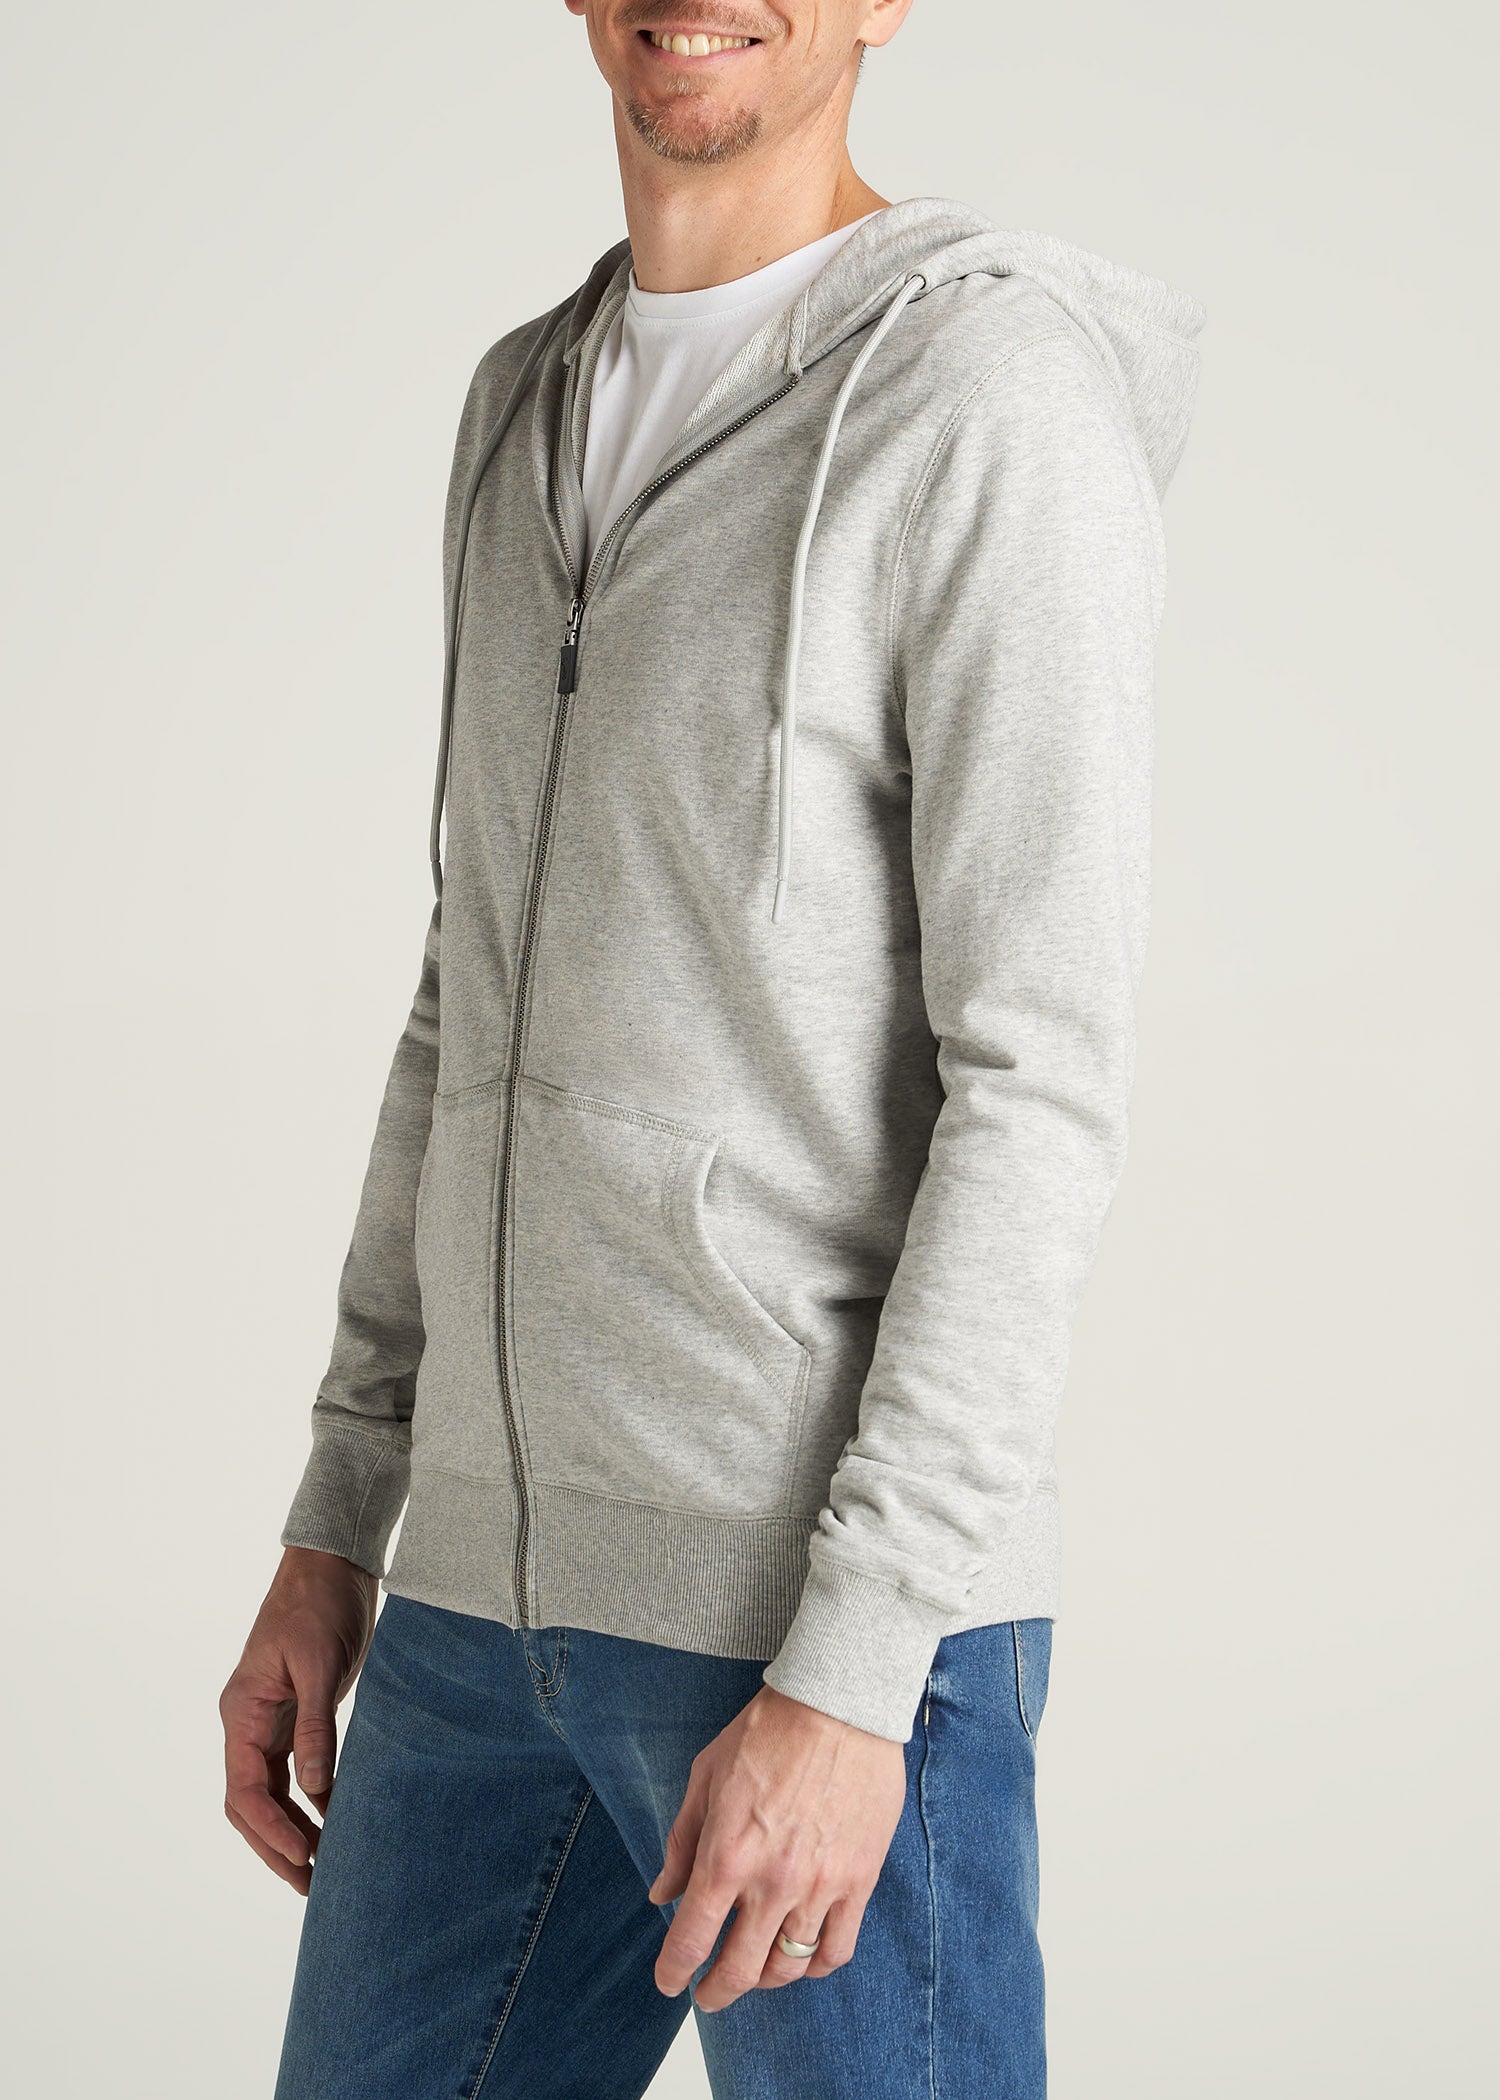    American-Tall-Men-8020-FrenchTerry-FullZip-Hoodie-GreyMix-side